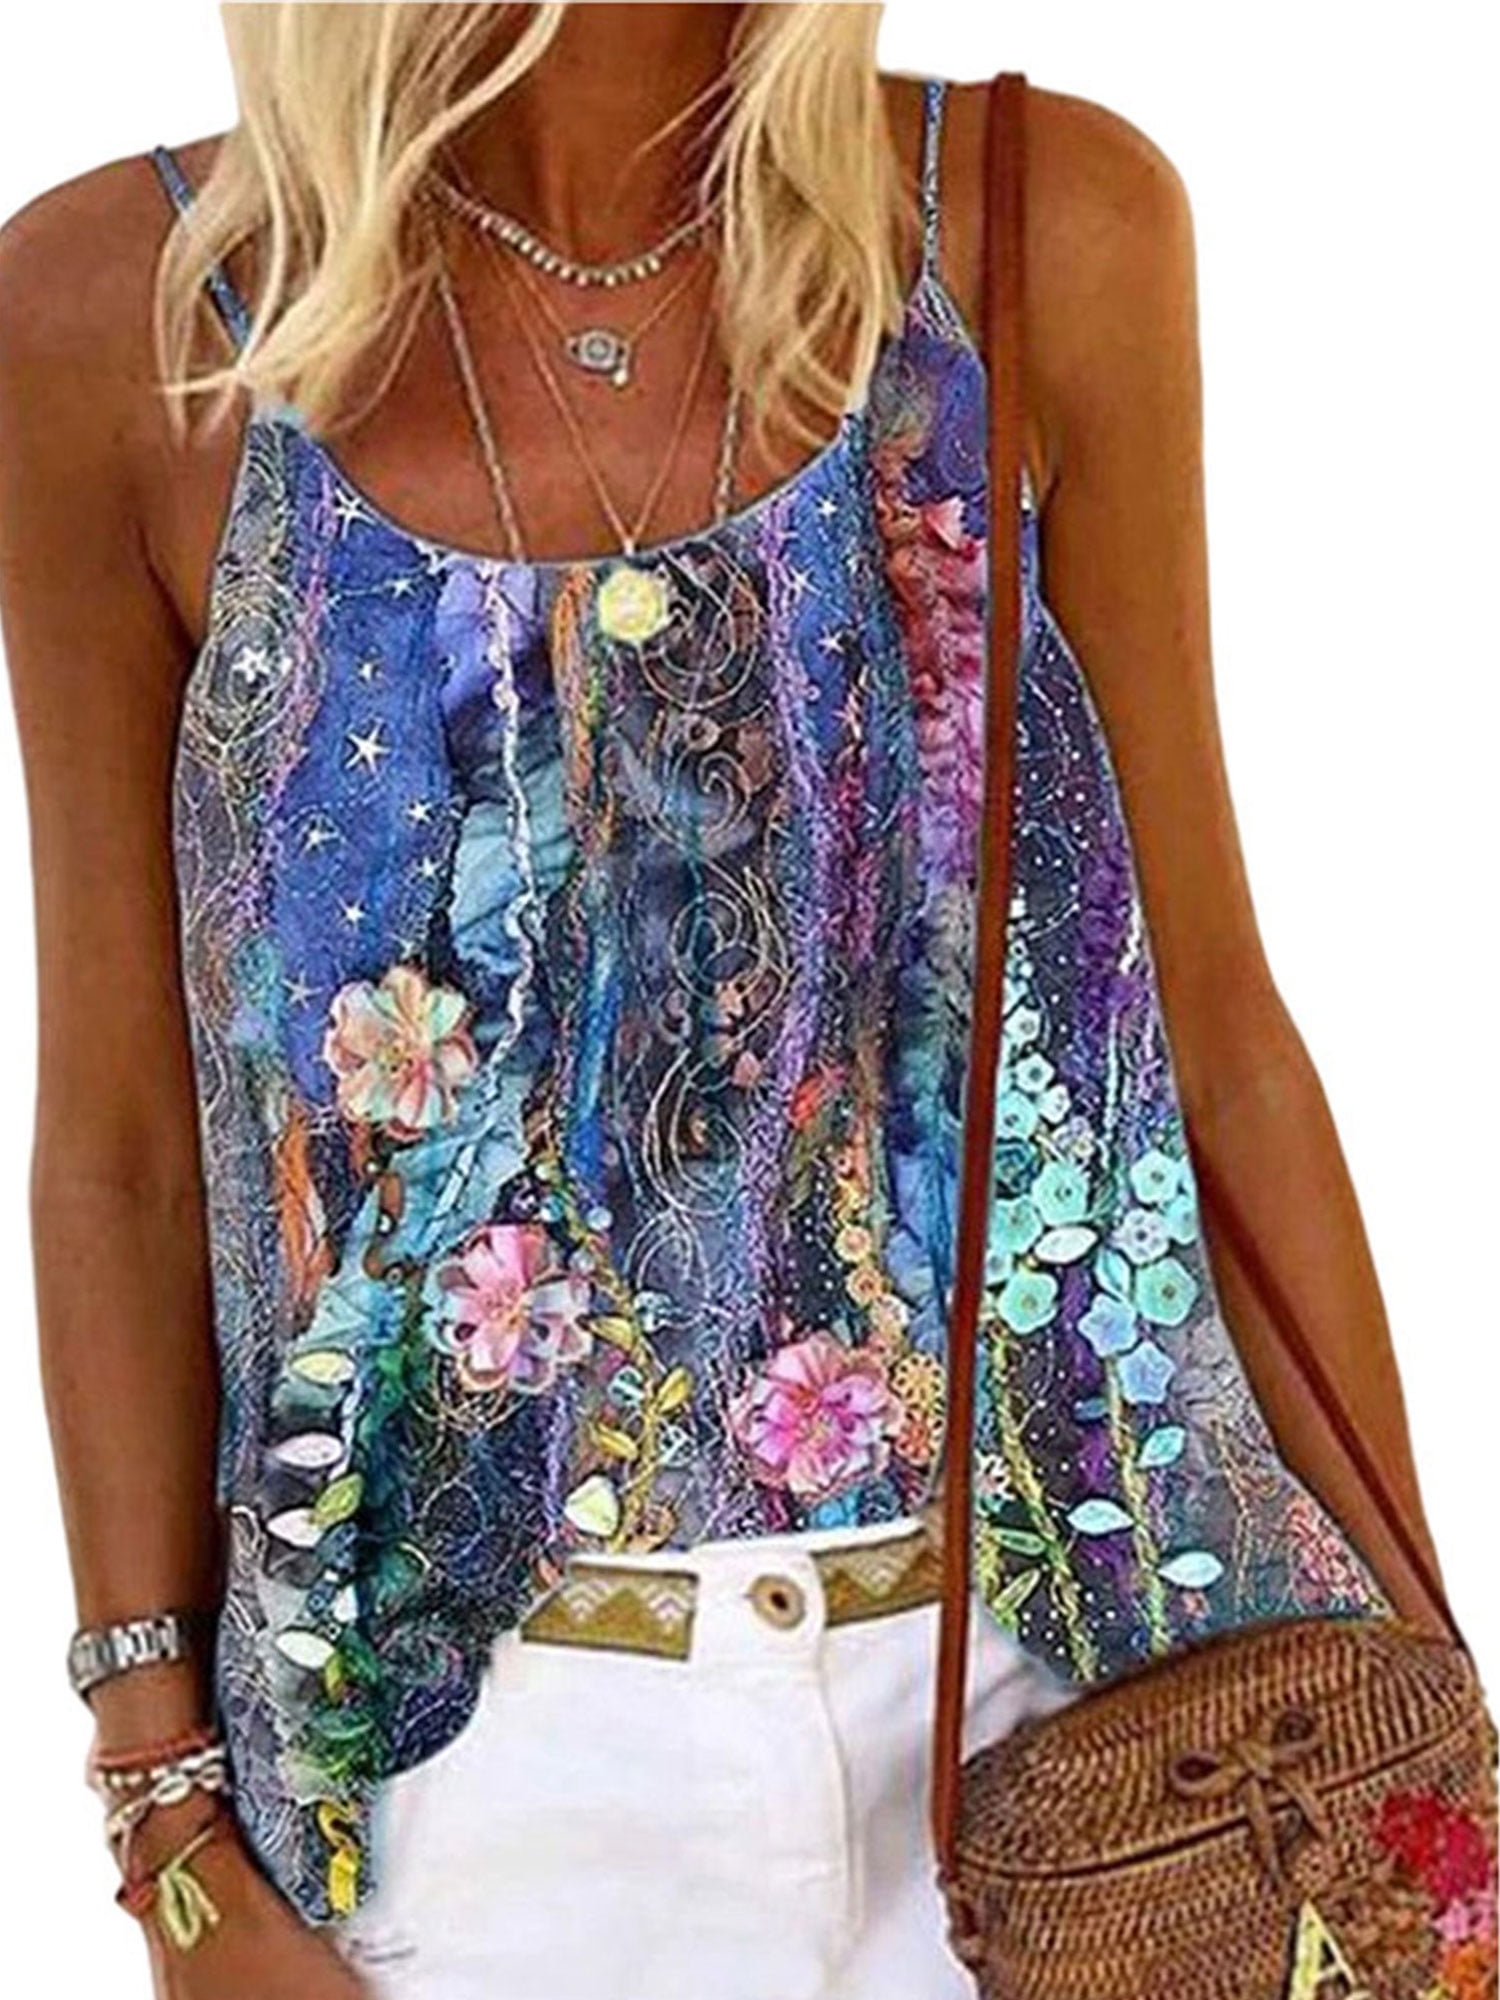 Plus Size Tank Tops for Women Summer V-Neck Floral T-Shirt Sleeveless Blouse Casual Printed Loose Vest Tee Shirts 